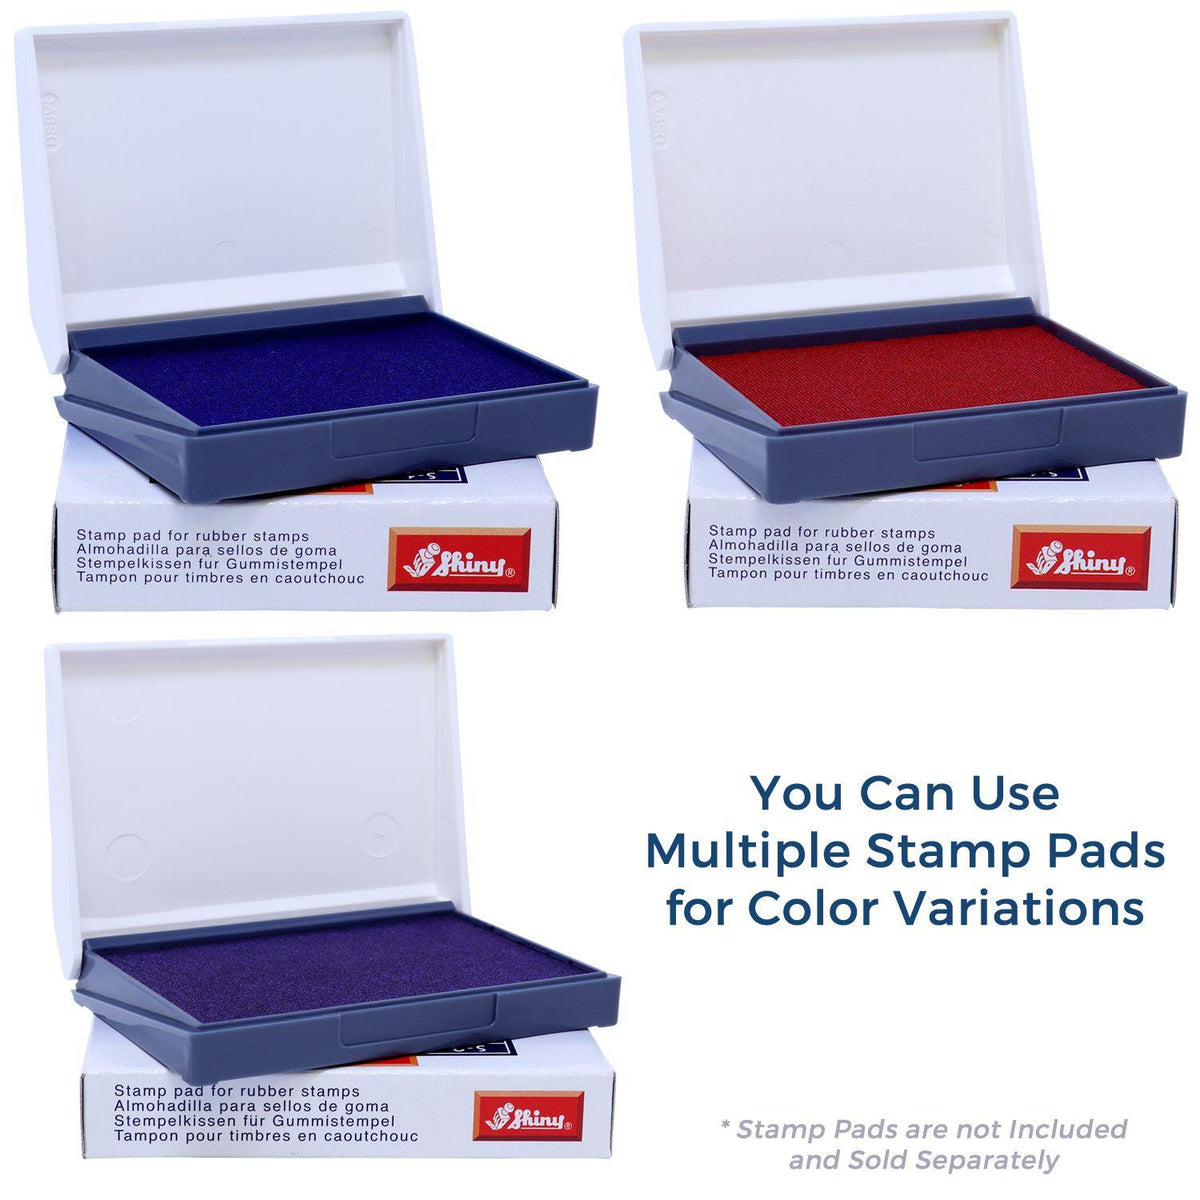 Stamp Pads for Good Rubber Stamp Available